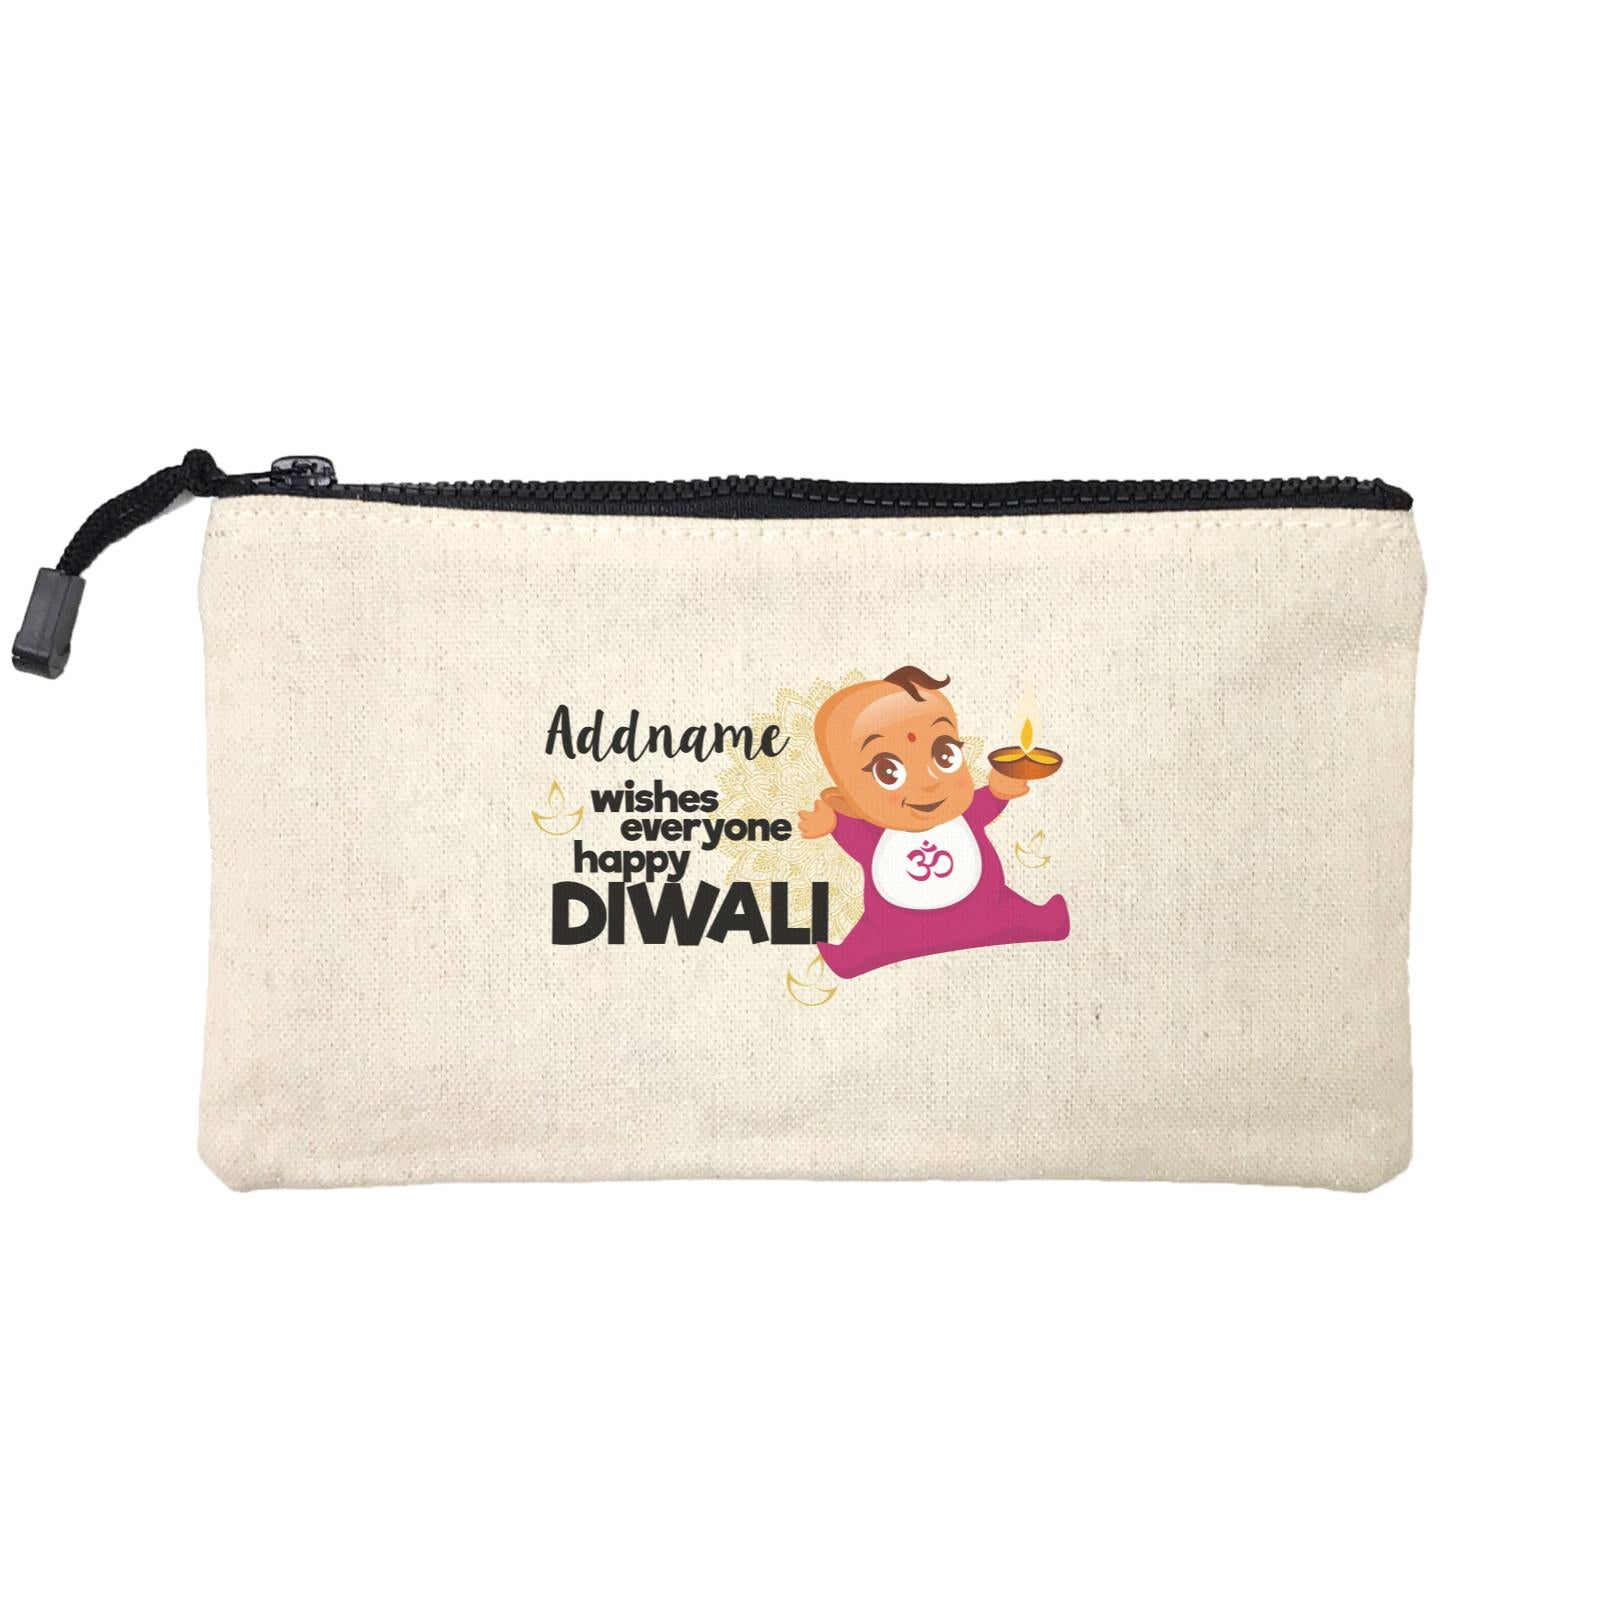 Cute Baby Wishes Everyone Happy Diwali Addname Mini Accessories Stationery Pouch